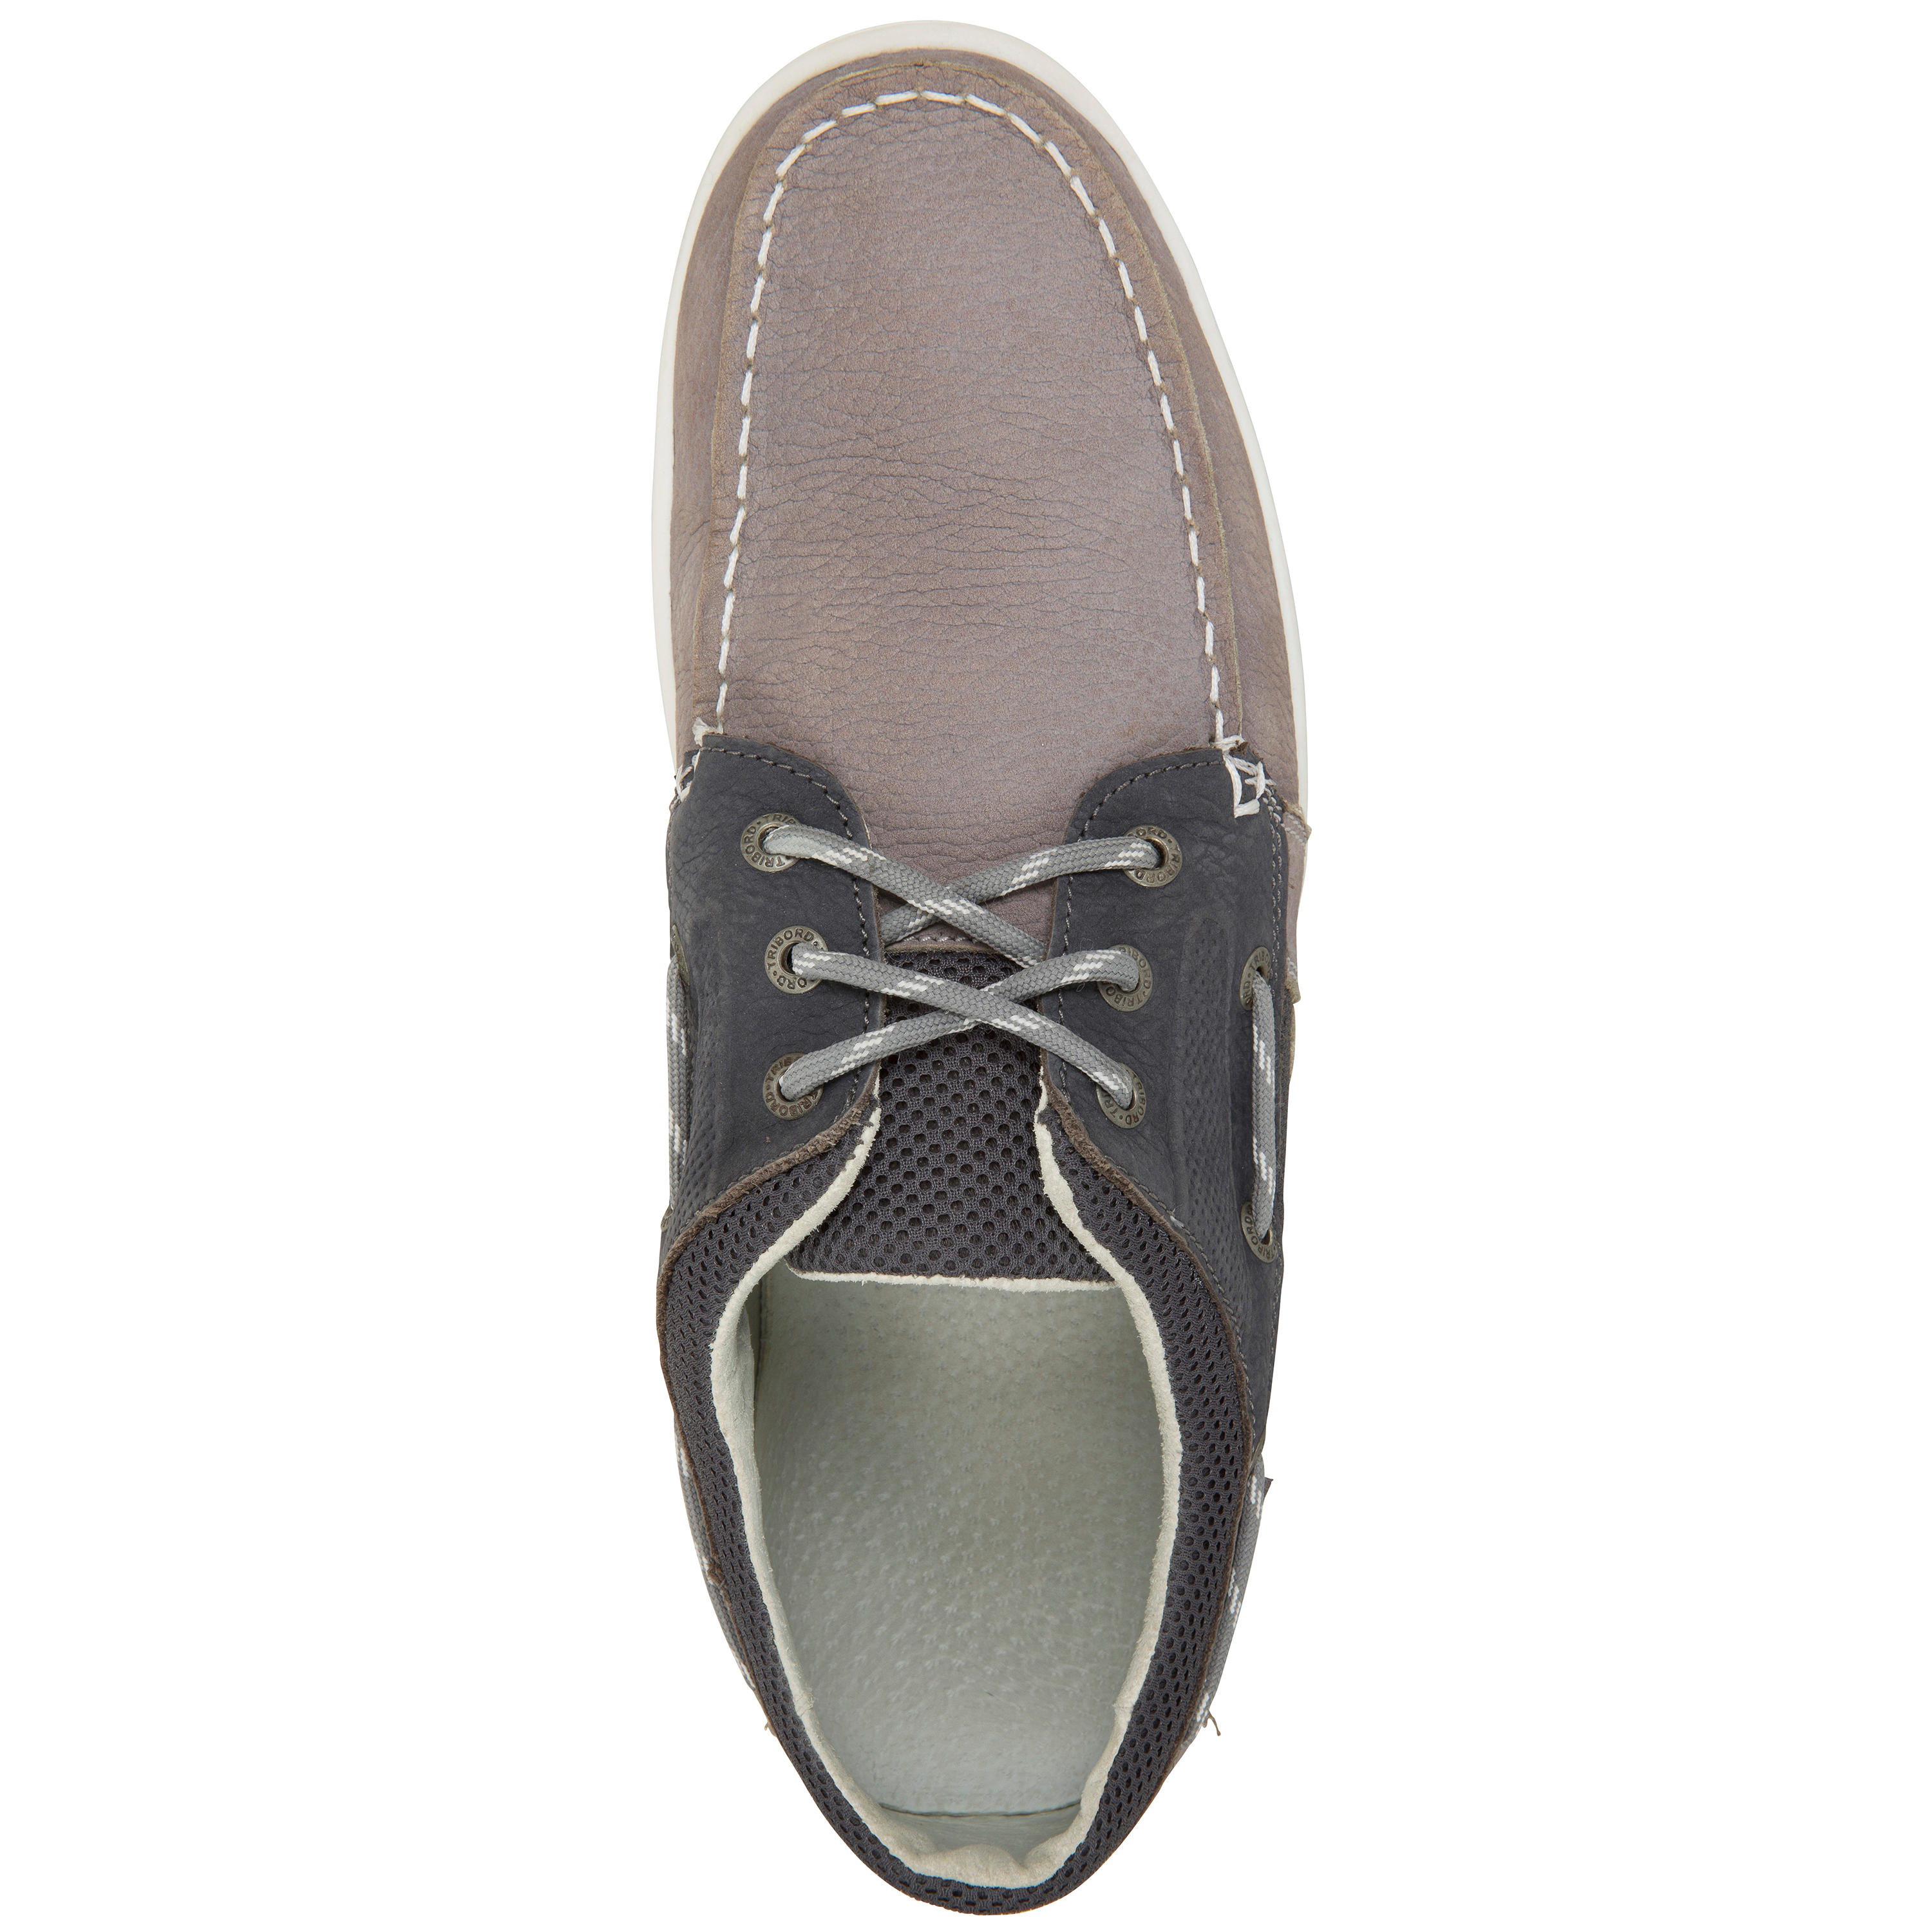 Men's Leather Boat Shoes CLIPPER - Grey 2/9